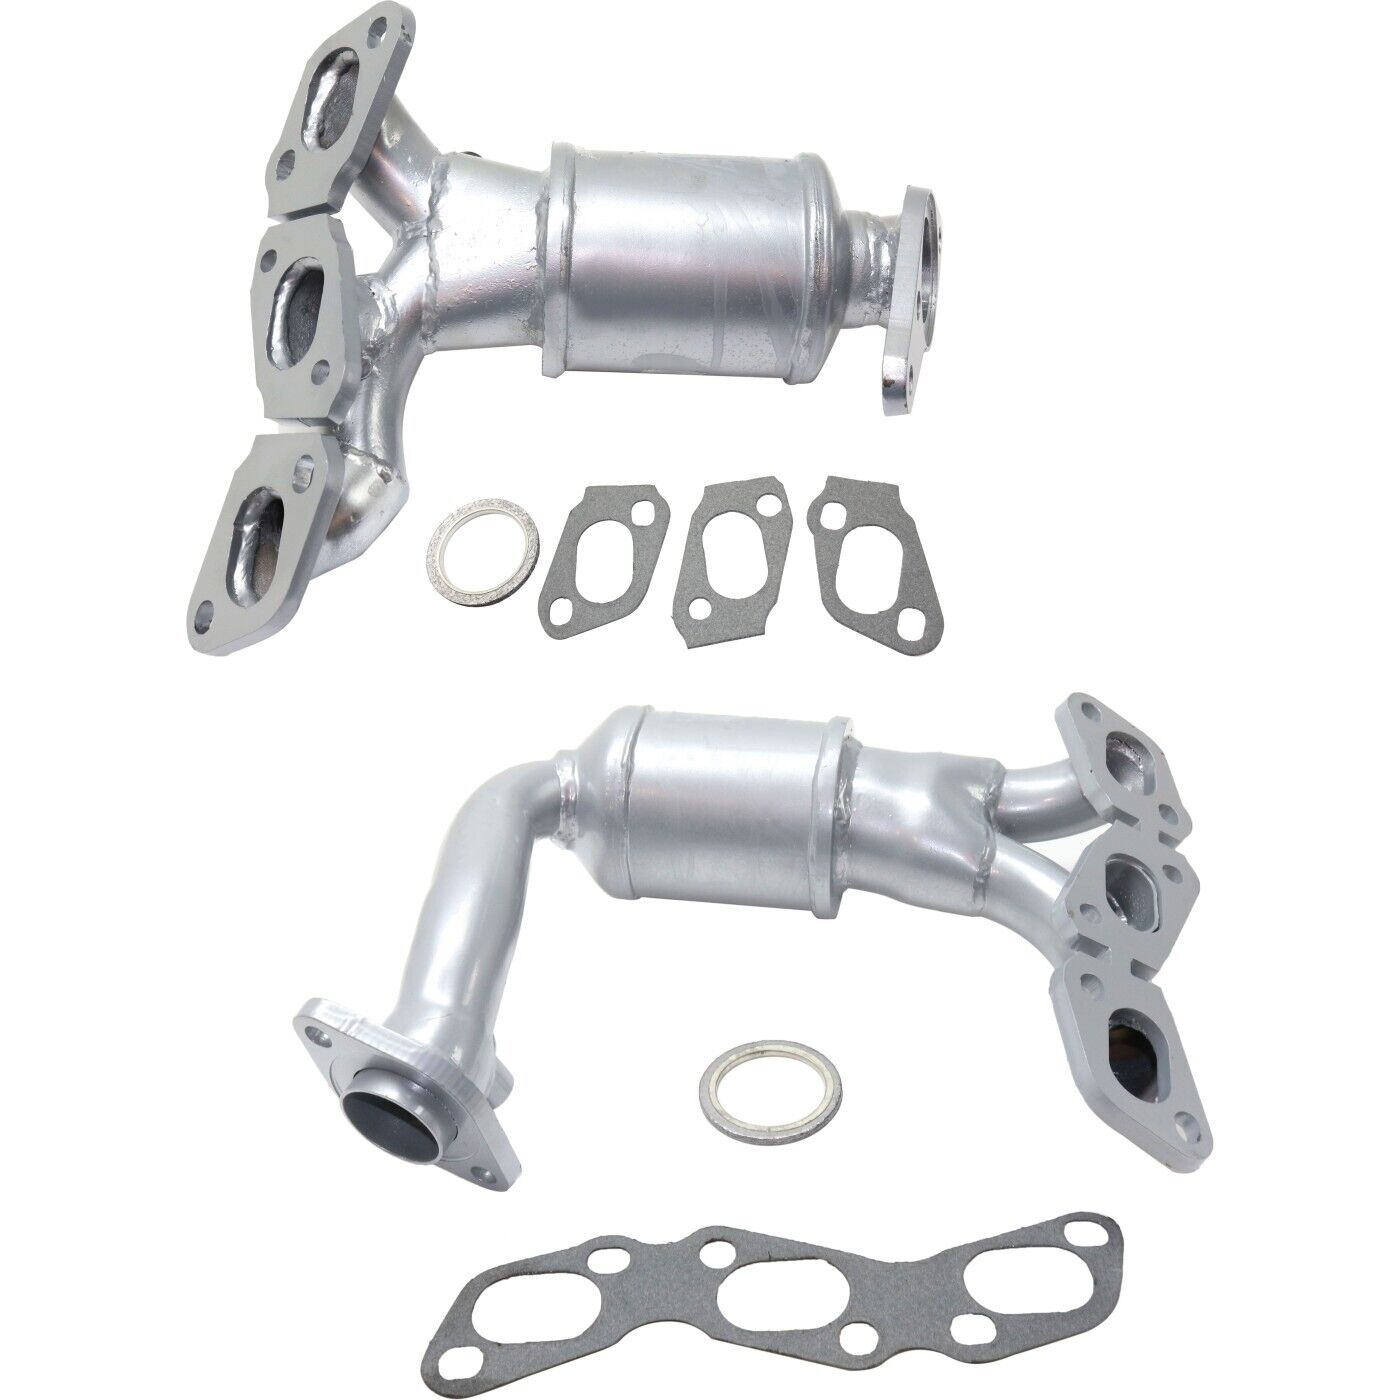 New Set of 2 Catalytic Converters for Mazda 6 2003-2005 Pair